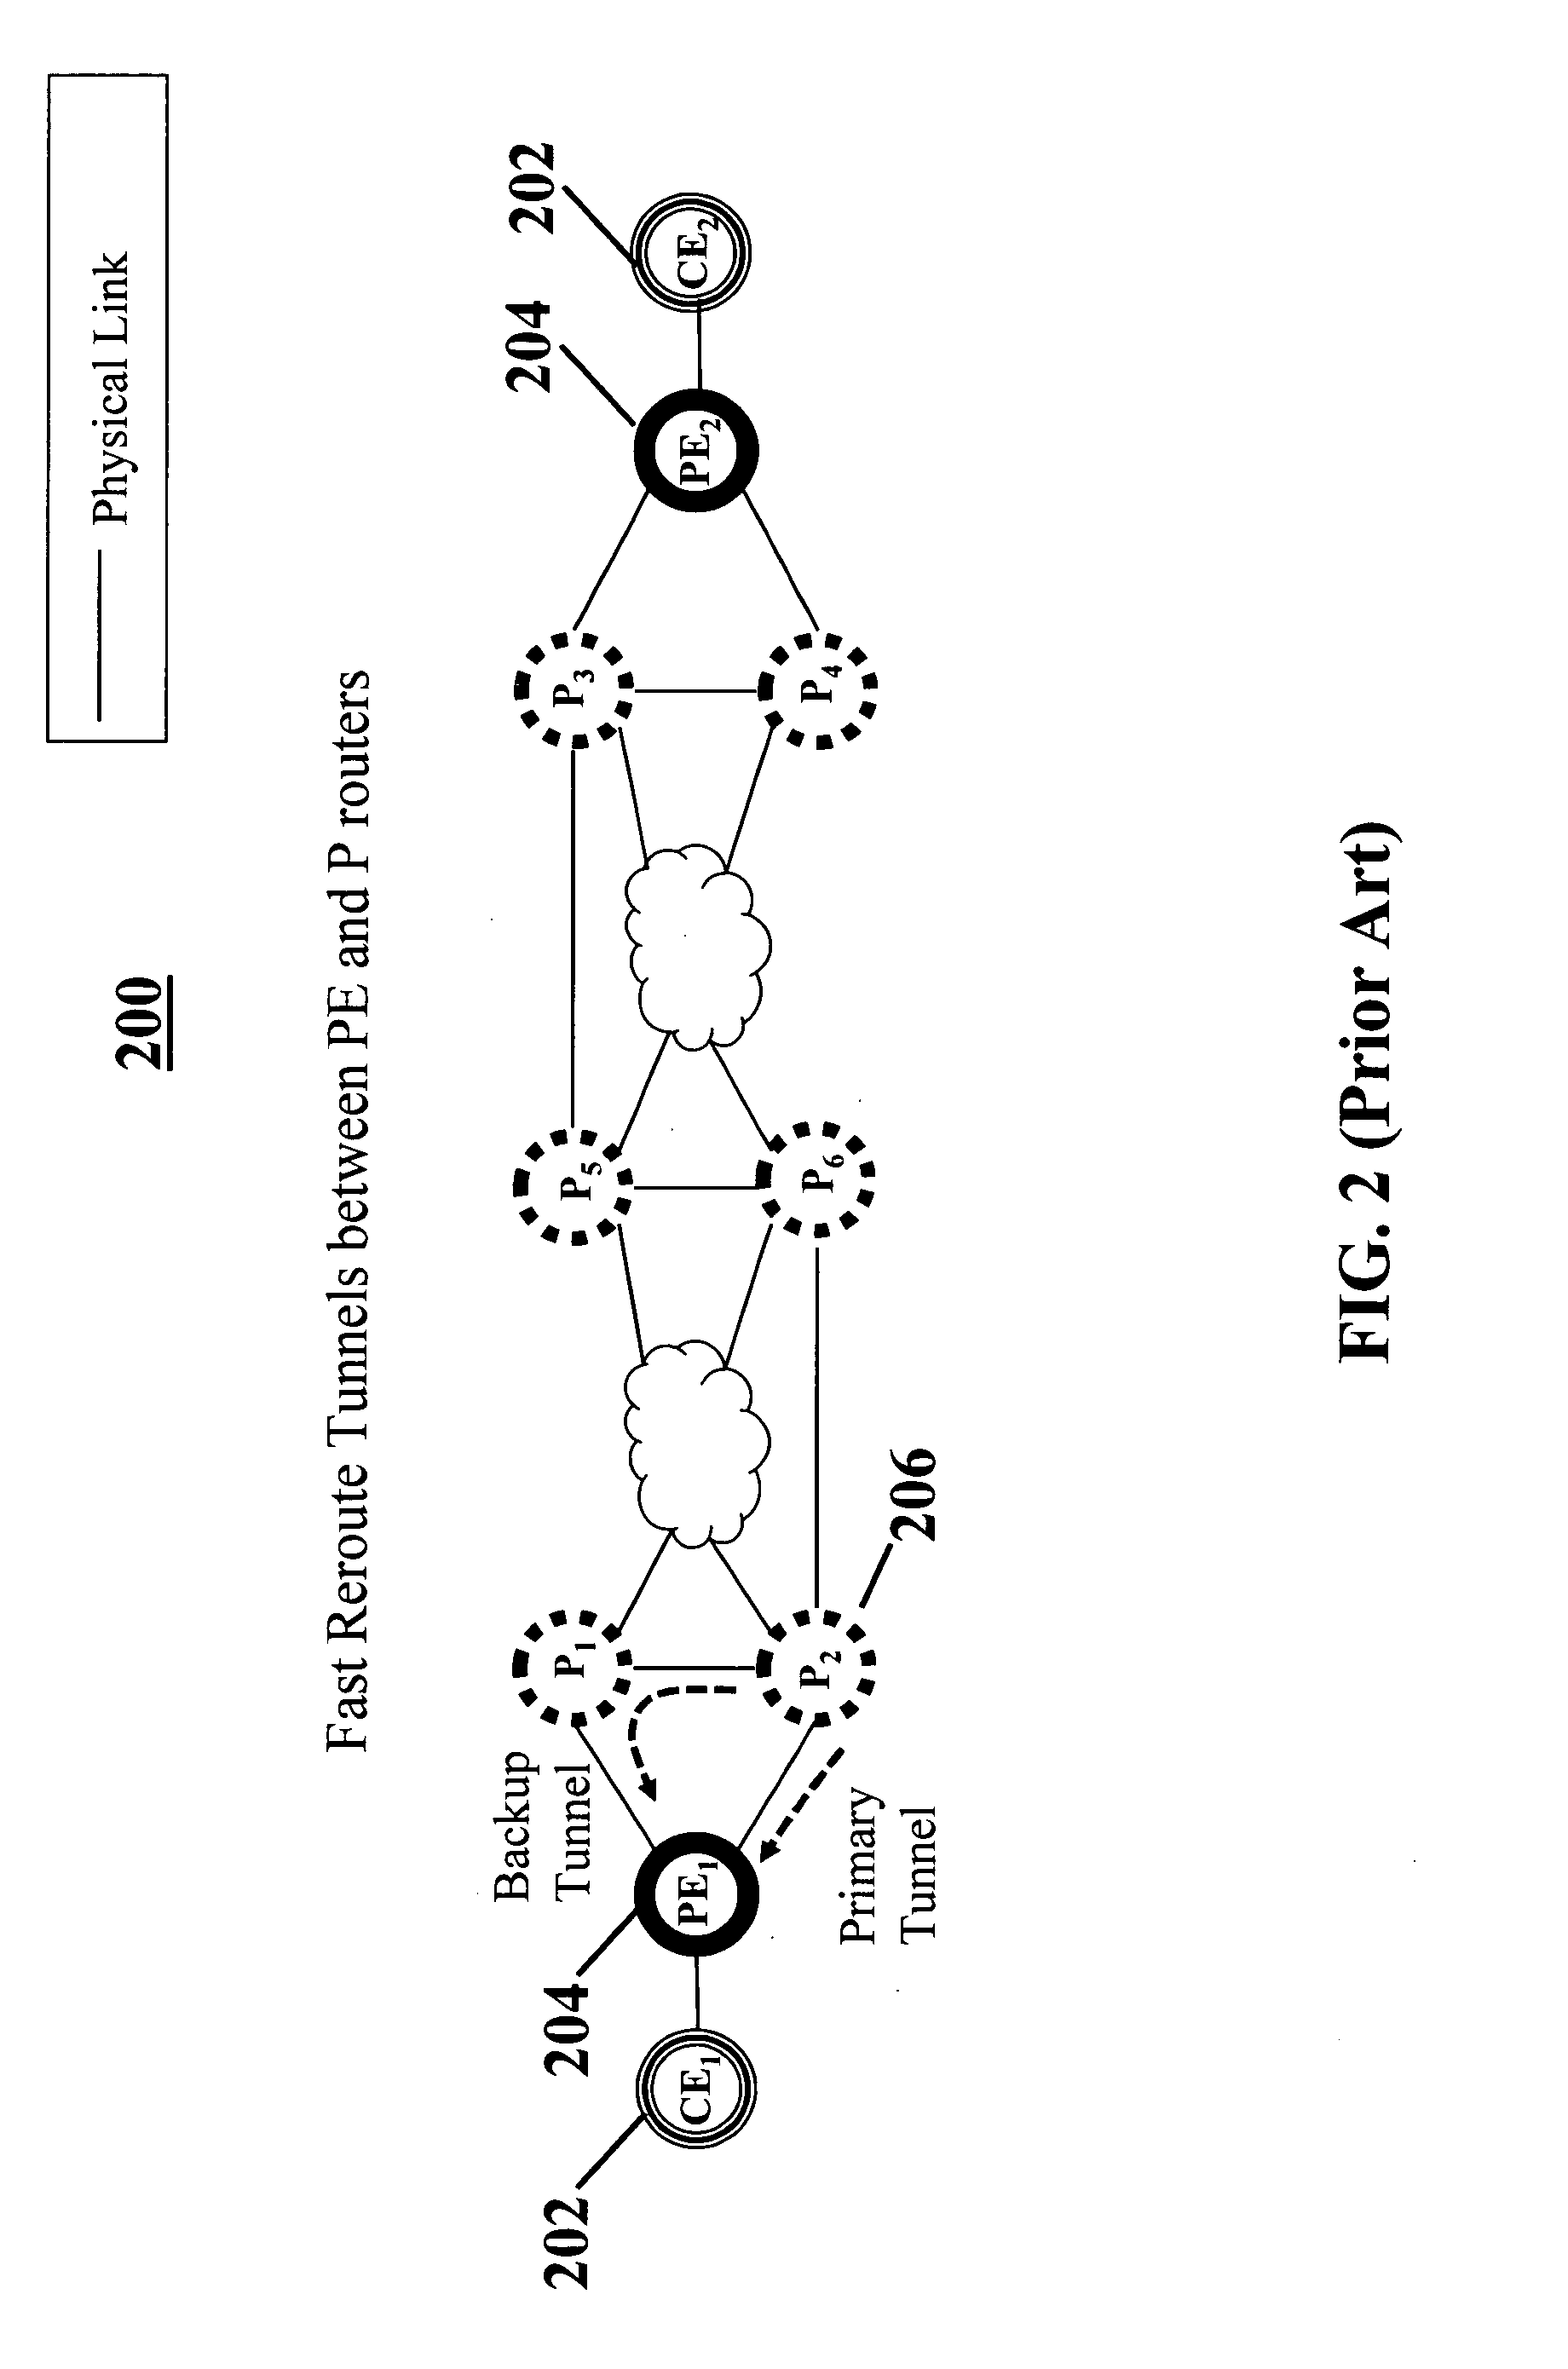 Method to reduce routing convergence at the edge